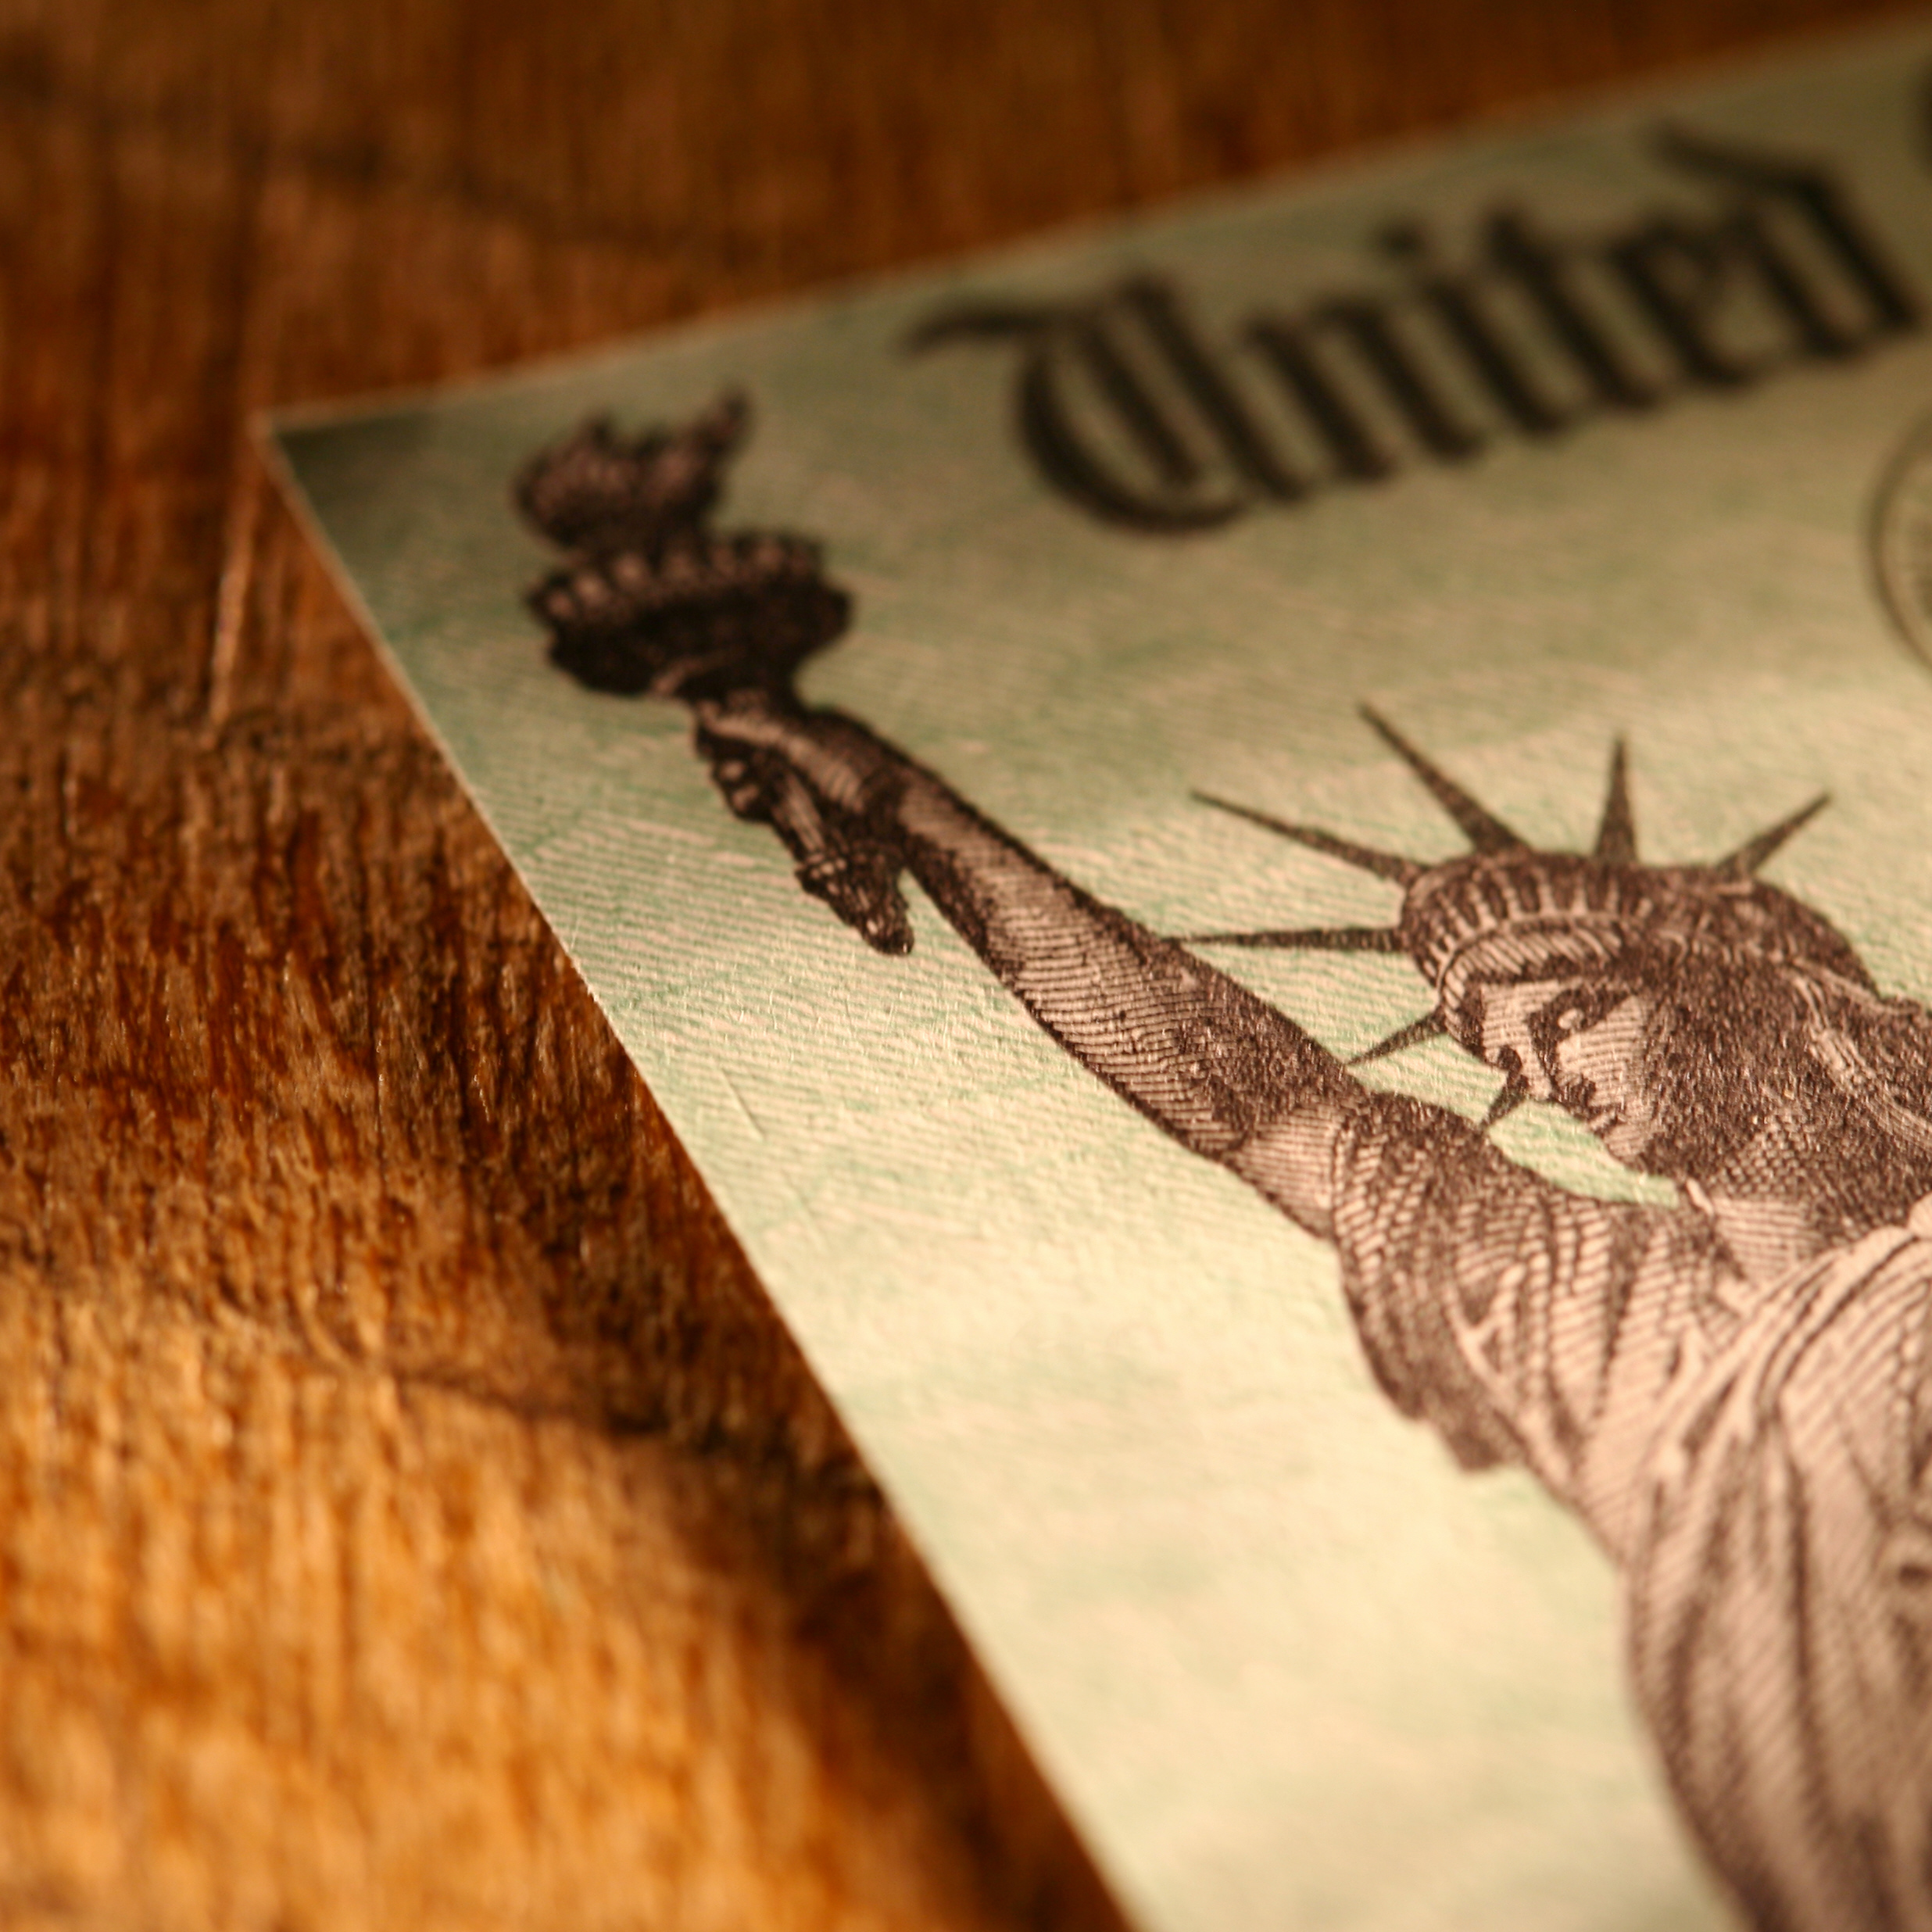 Treasury Check image on wooden background